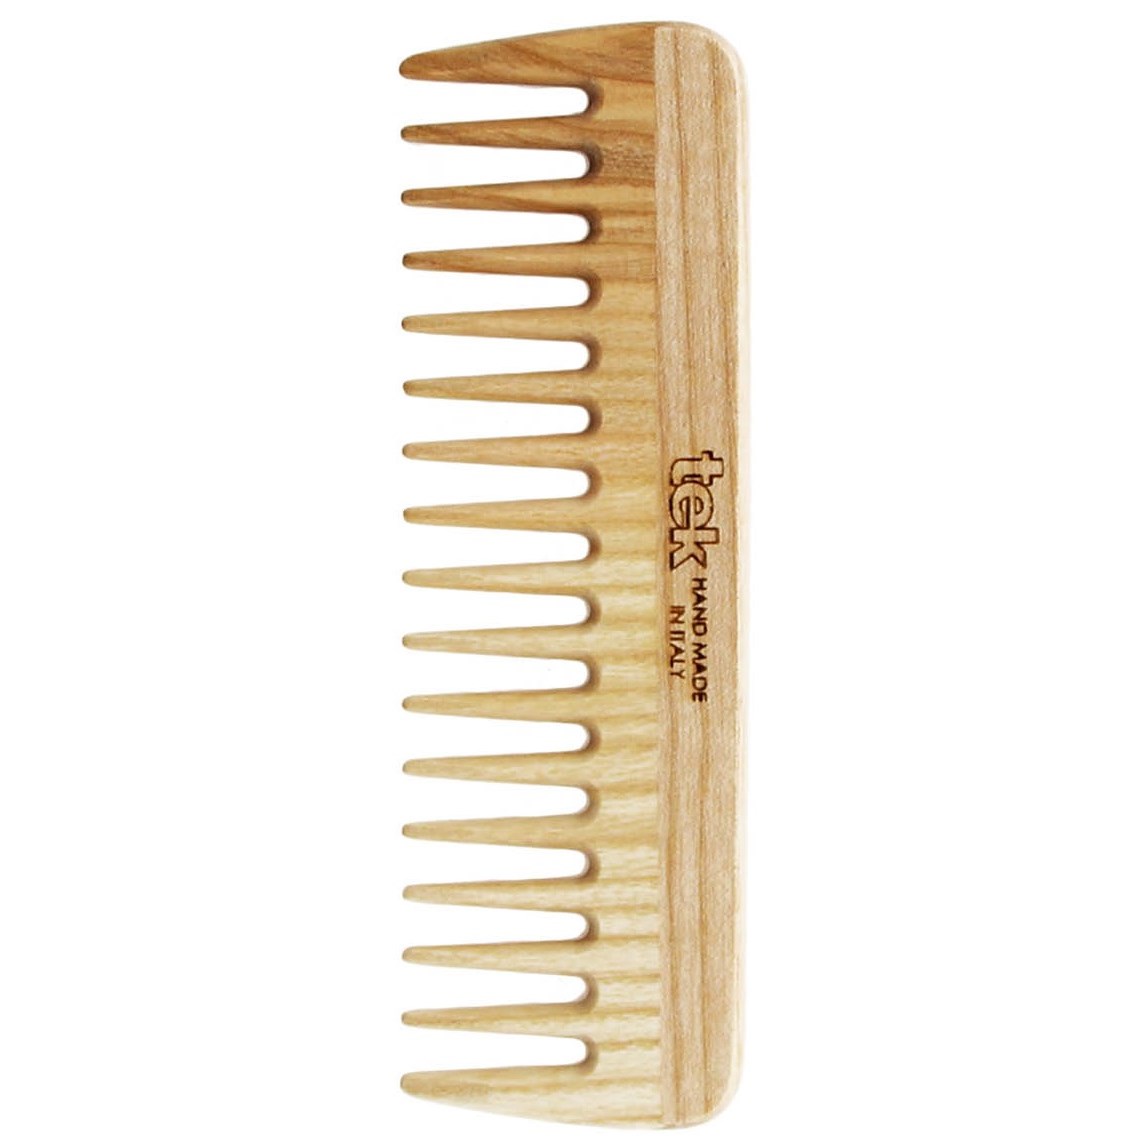 Tek Medium Sized Wooden Comb With Wide Teeth